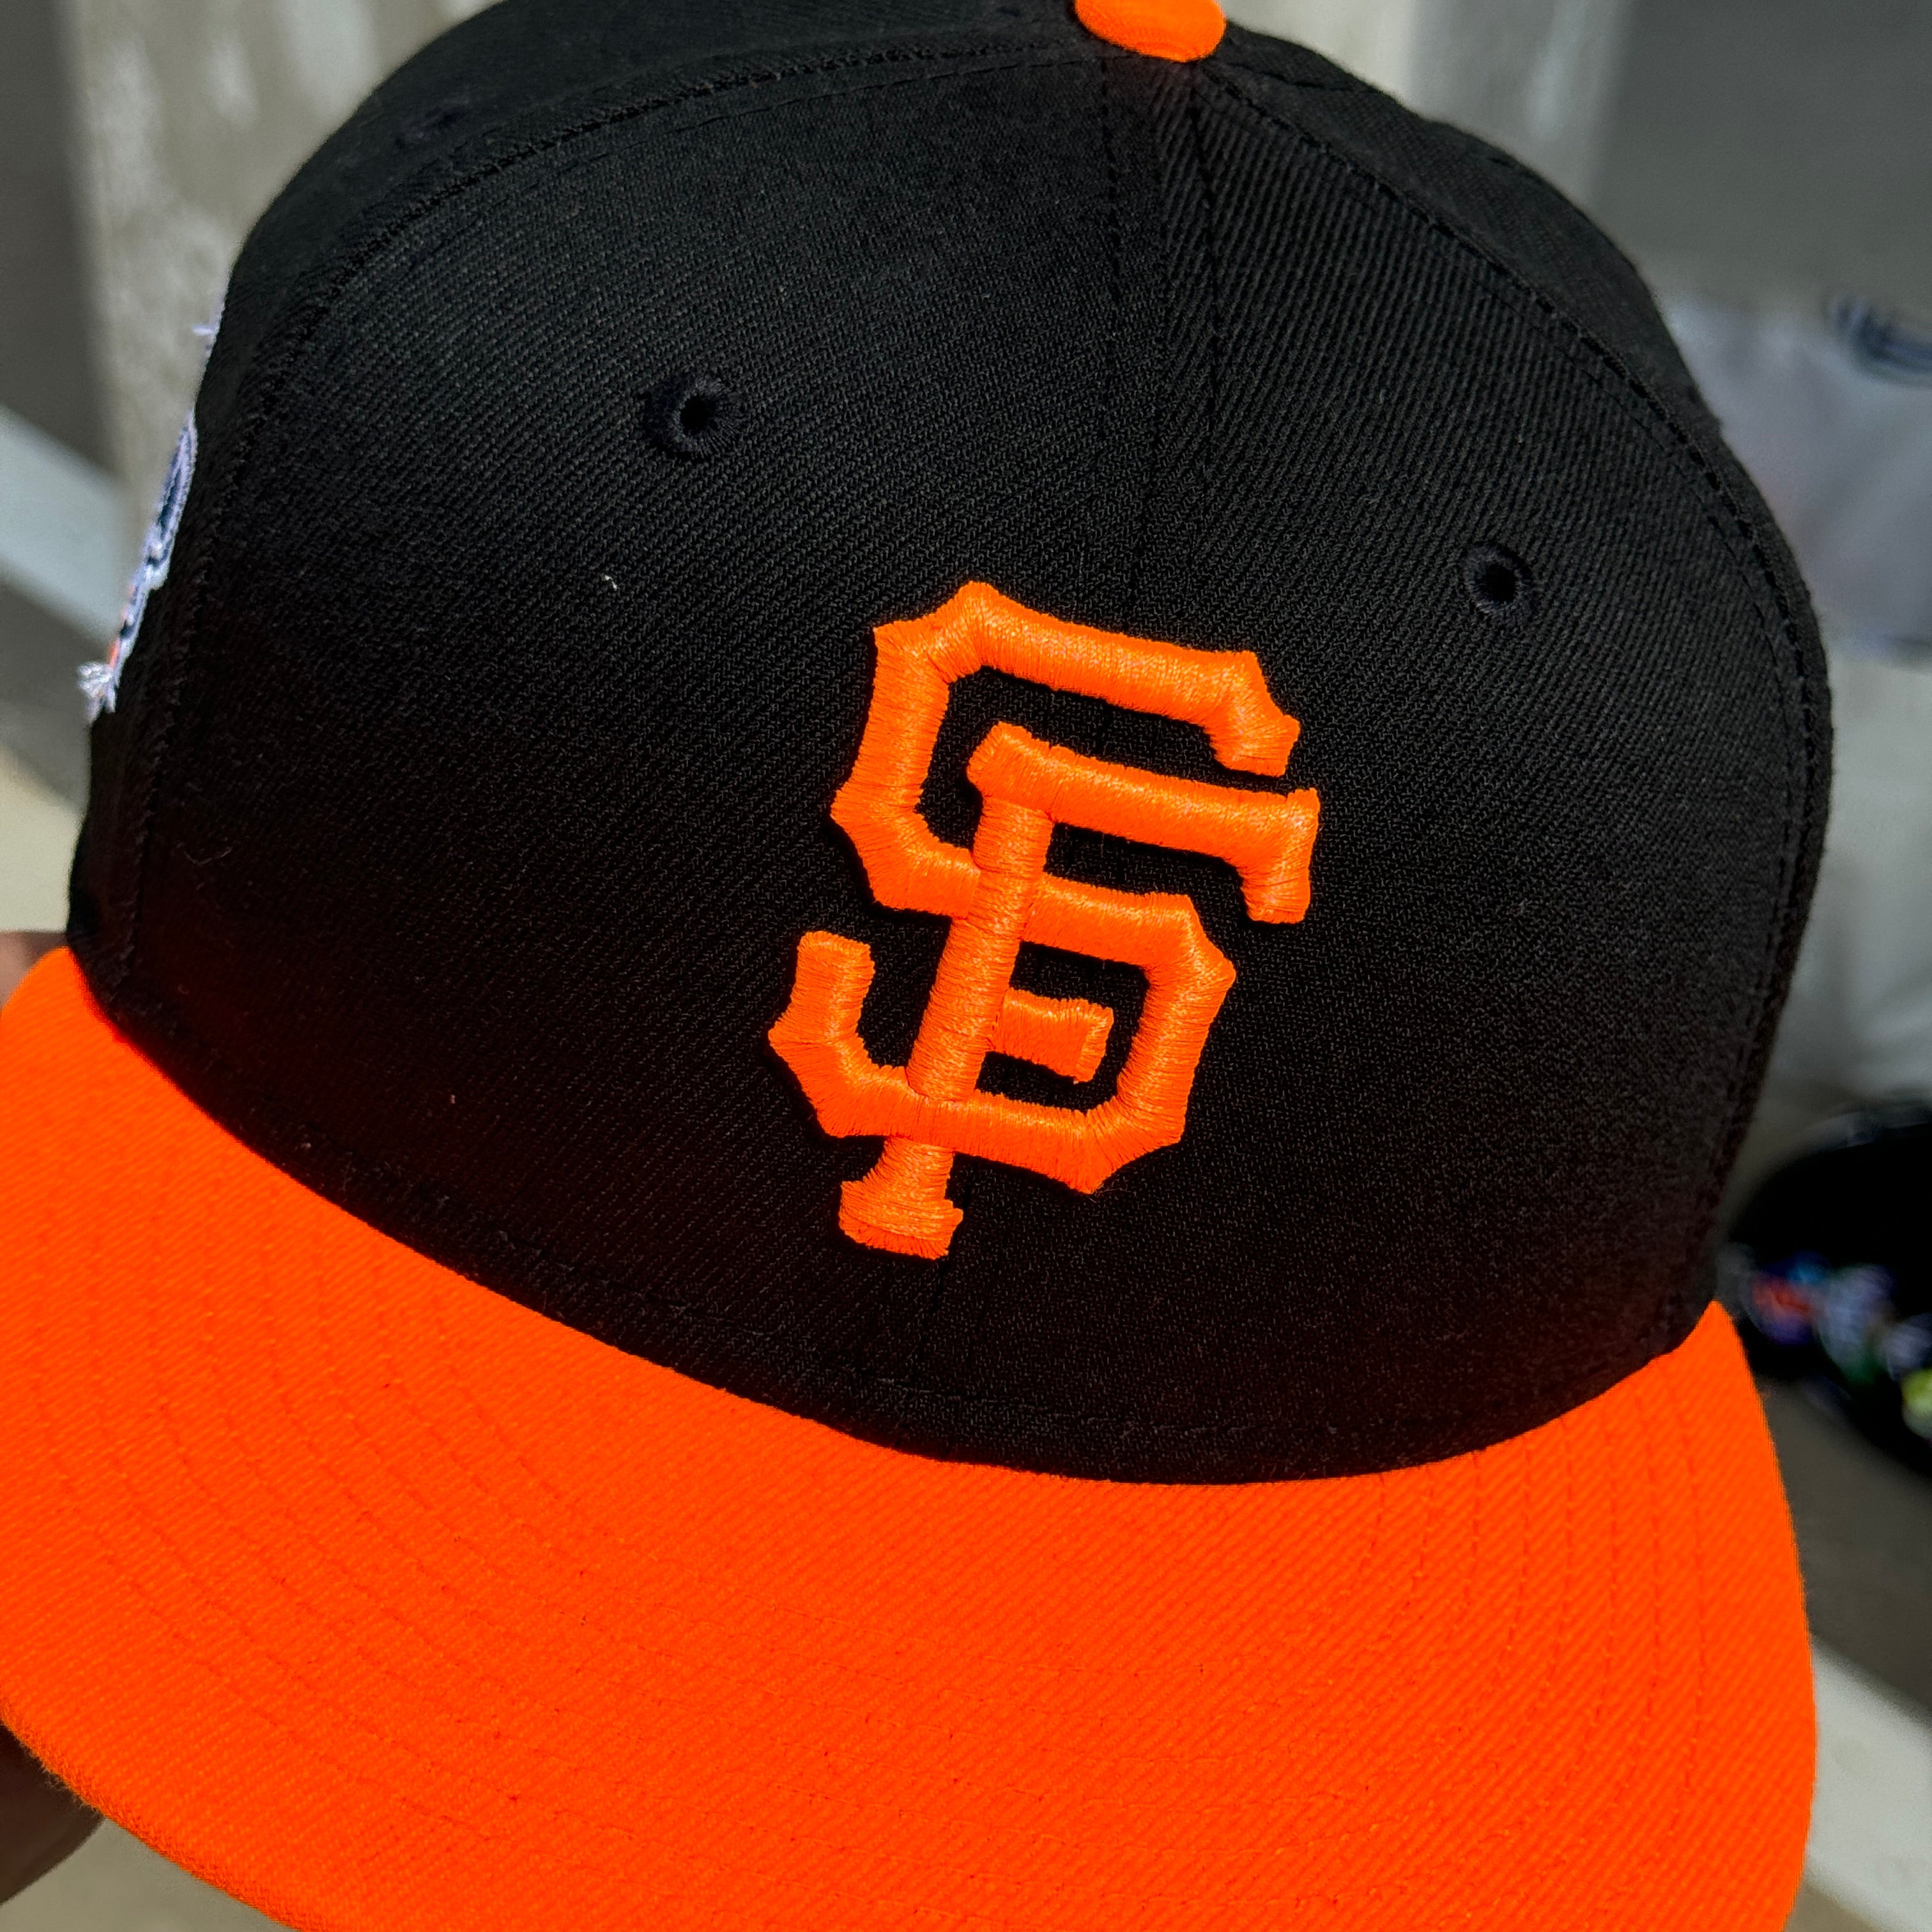 USED 7 Black San Francisco Giants 2010 World Series 59fifty New Era Fitted Hat Cap